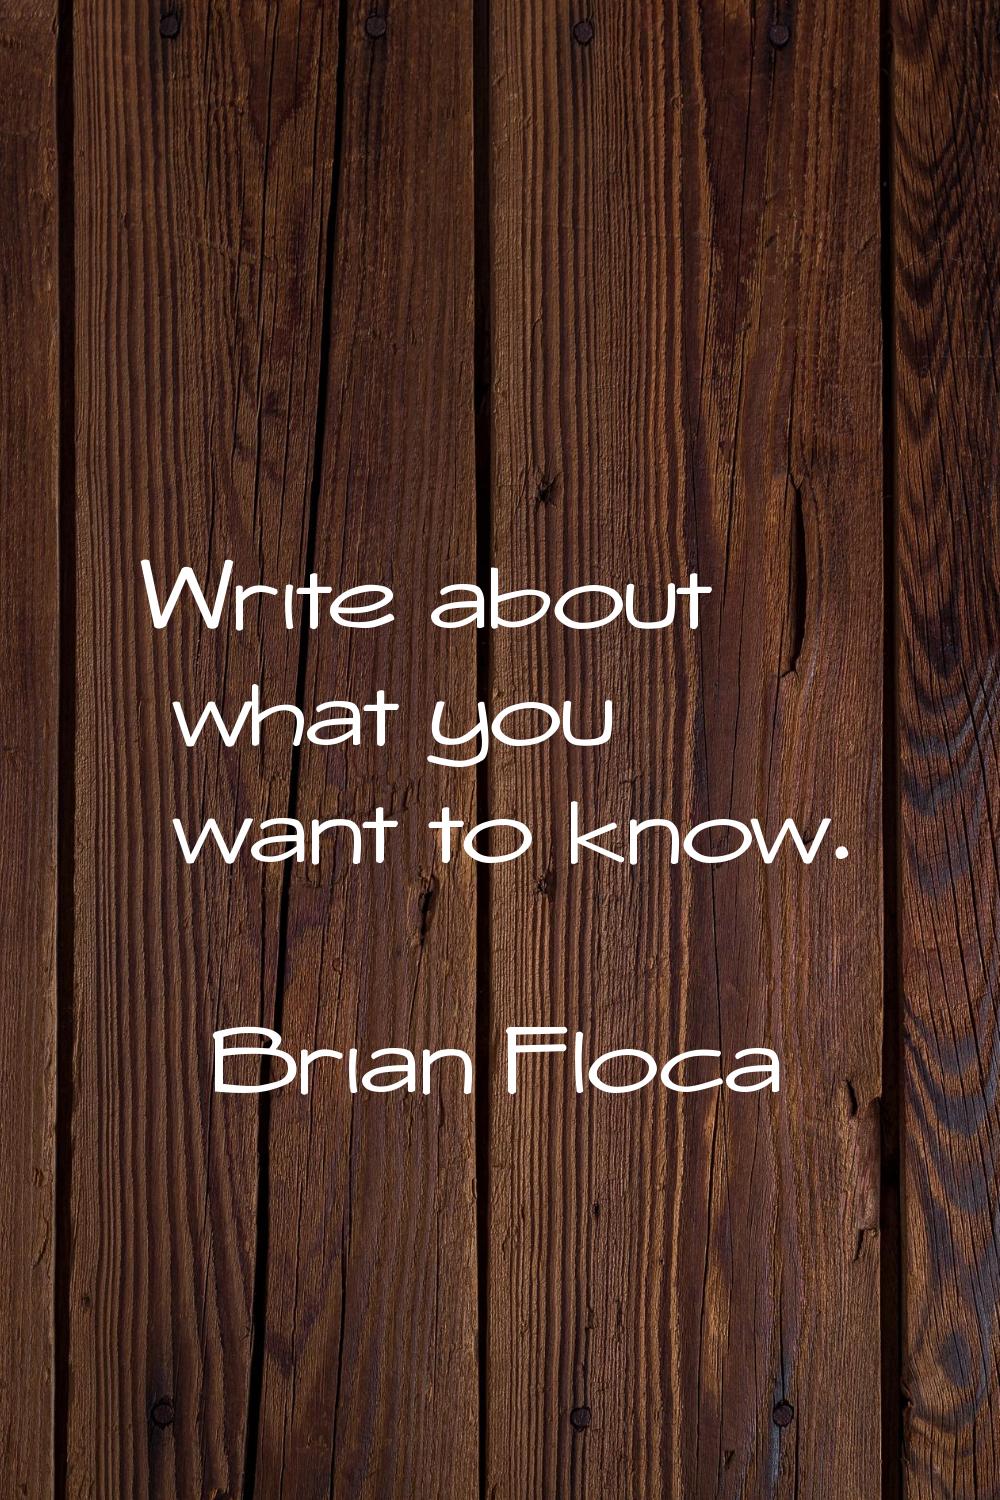 Write about what you want to know.